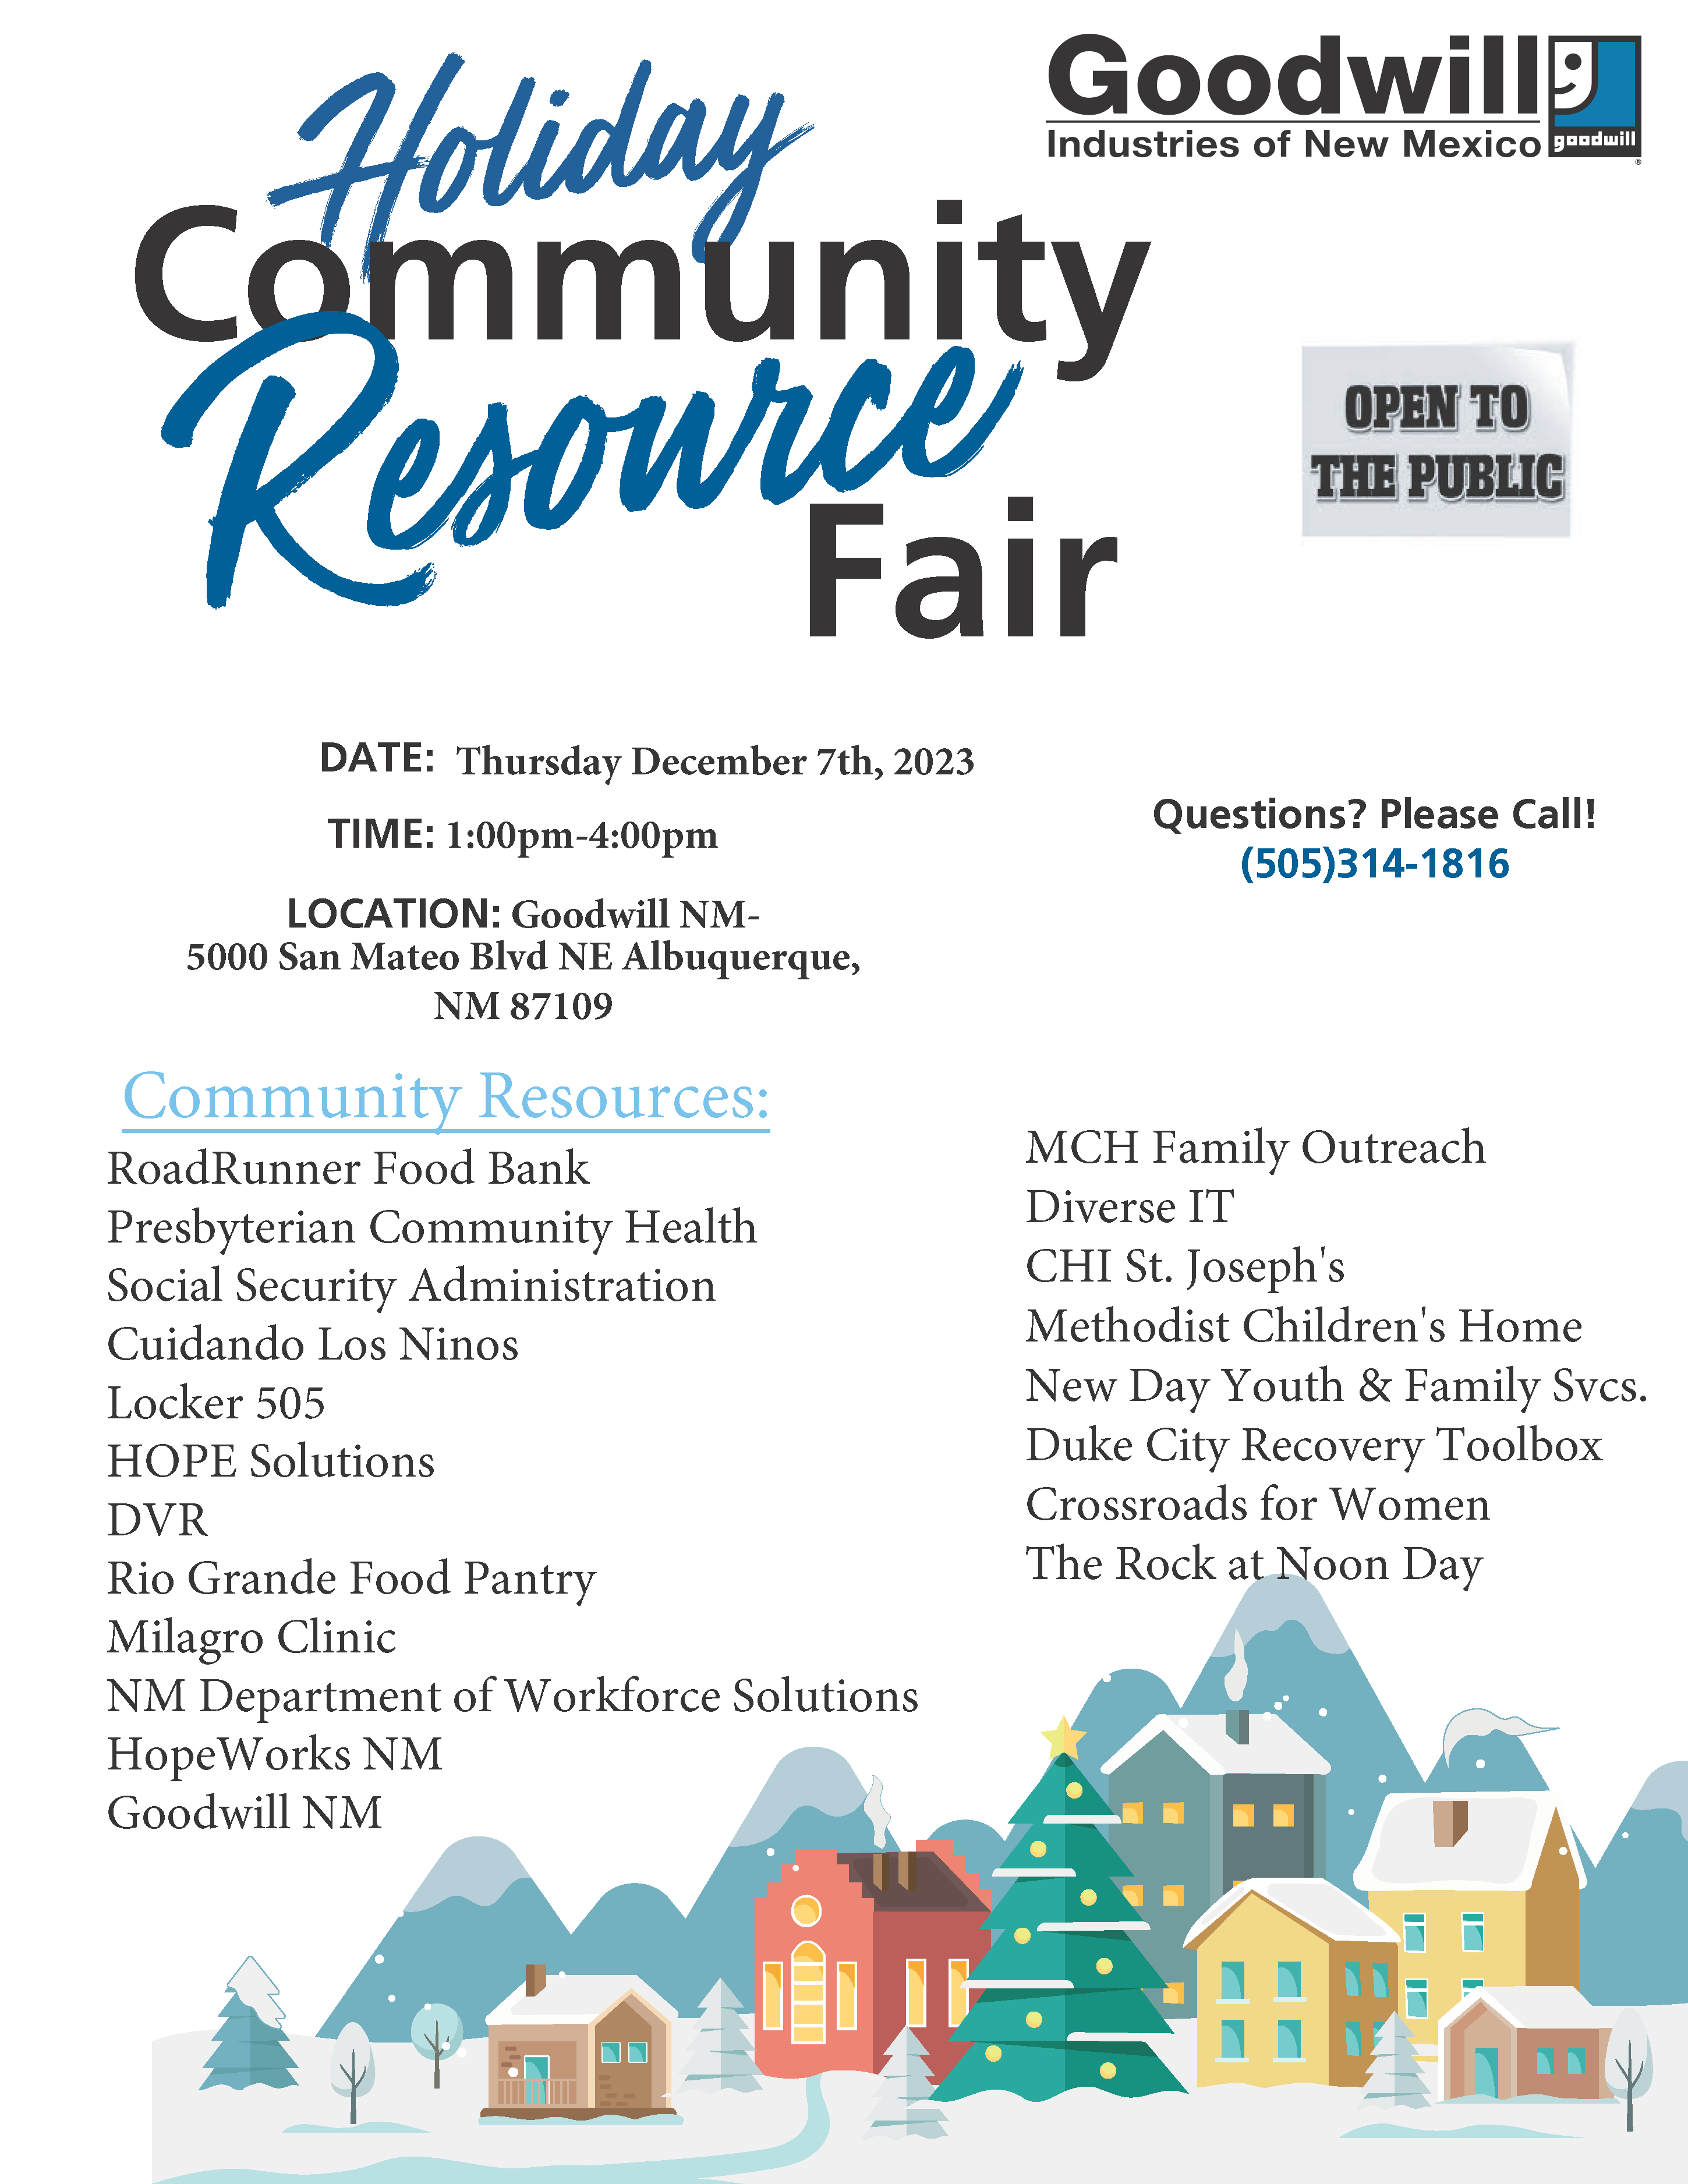 Goodwill Holiday Community Resource Fair flyer